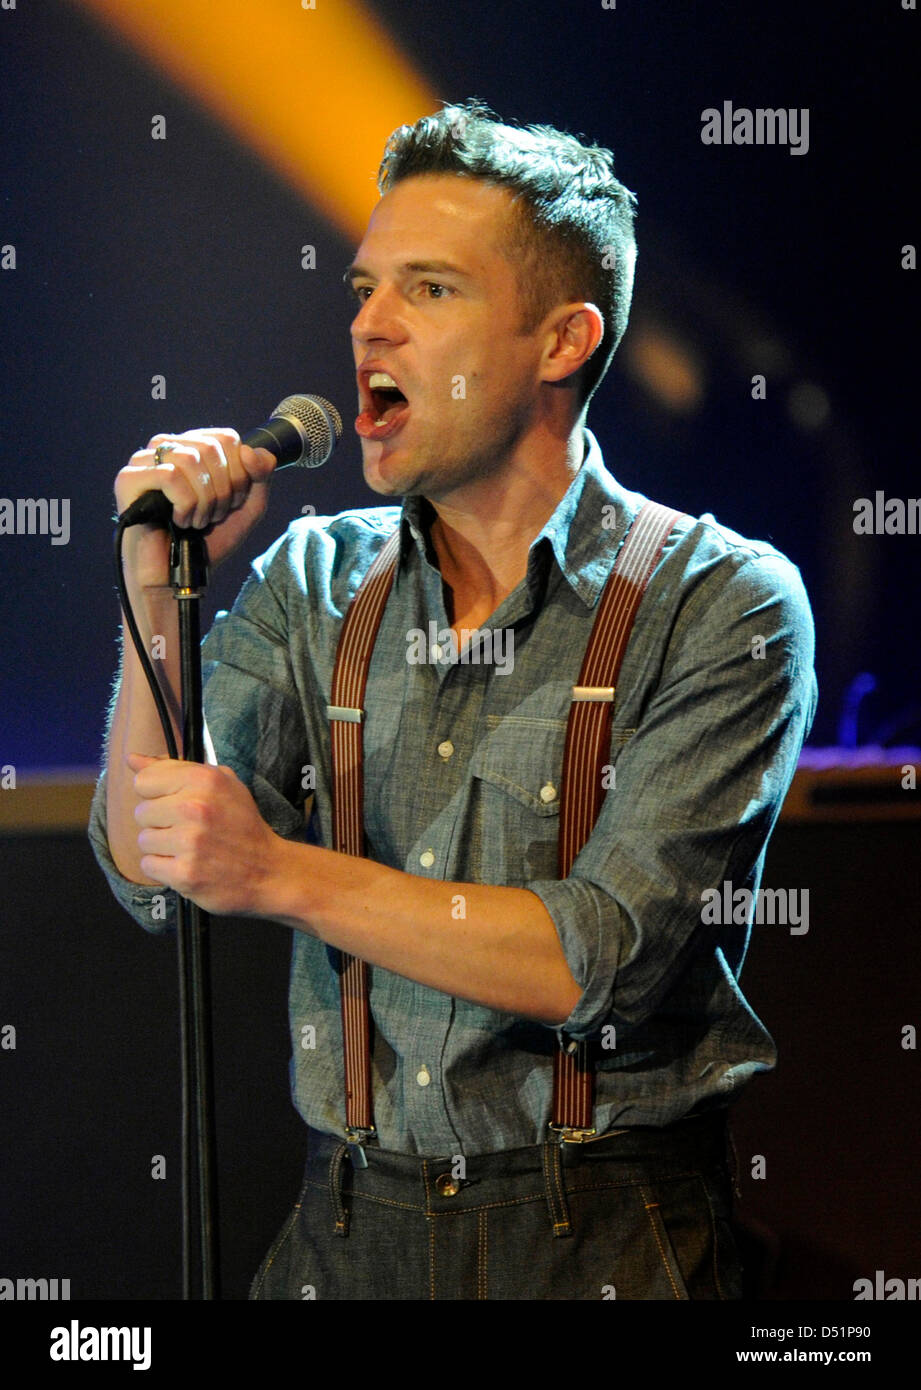 Singer Brandon Flowers appears on stage at the Special of the SWR3 New Pop Festival at Festspielhaus Baden-Baden, Germany, 25 September 2010. Photo: Uli Deck Stock Photo